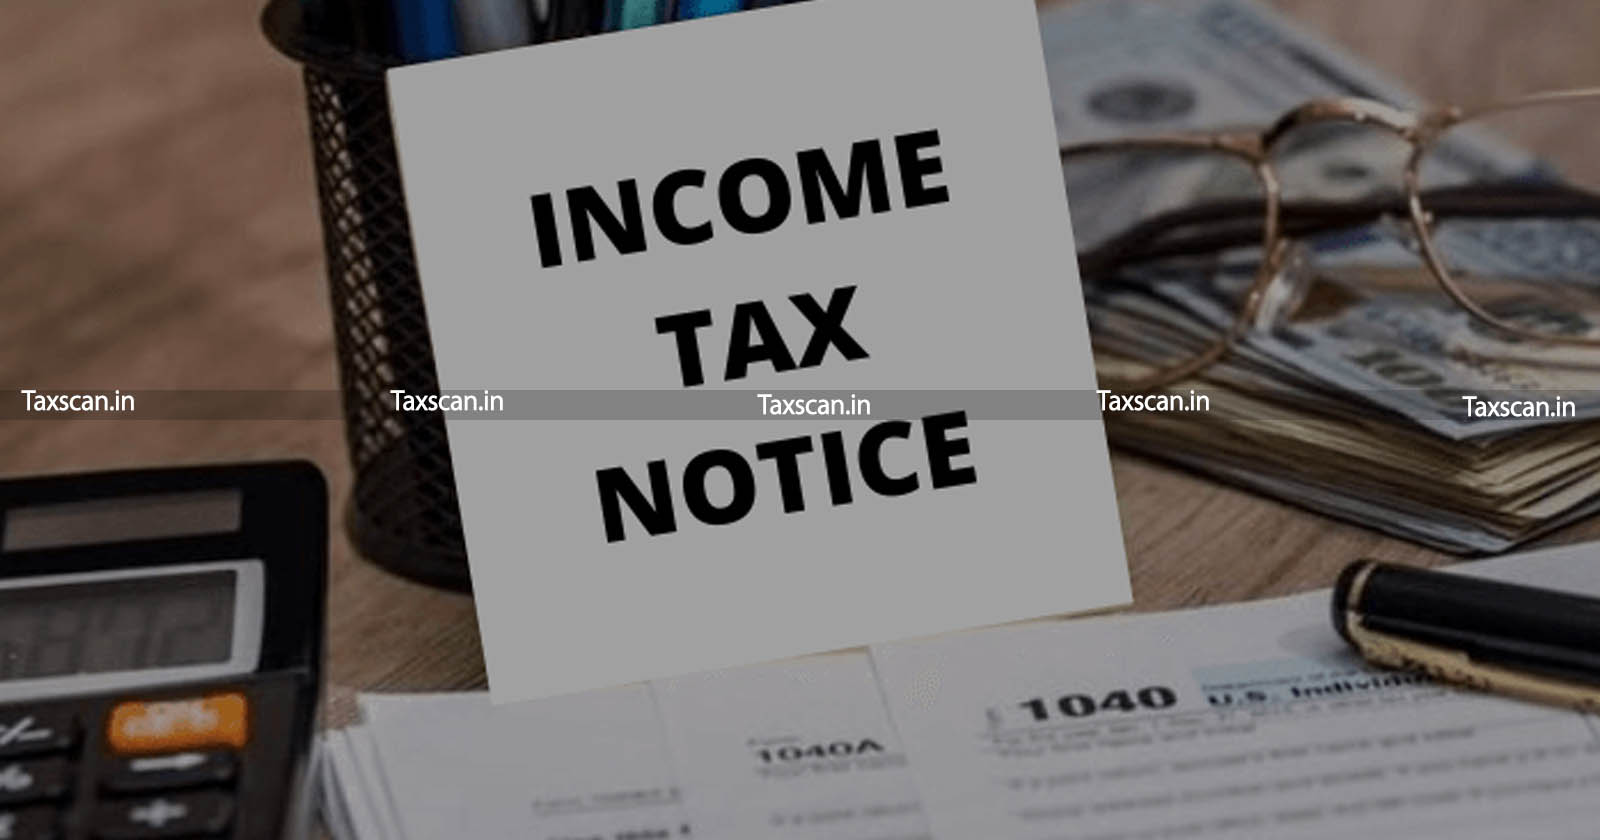 Income Tax Notice - Income Tax Notice Issued - Last Date of Limitation Period - Limitation Period - Delhi HC Dismisses - Review Petition - TAXSCAN